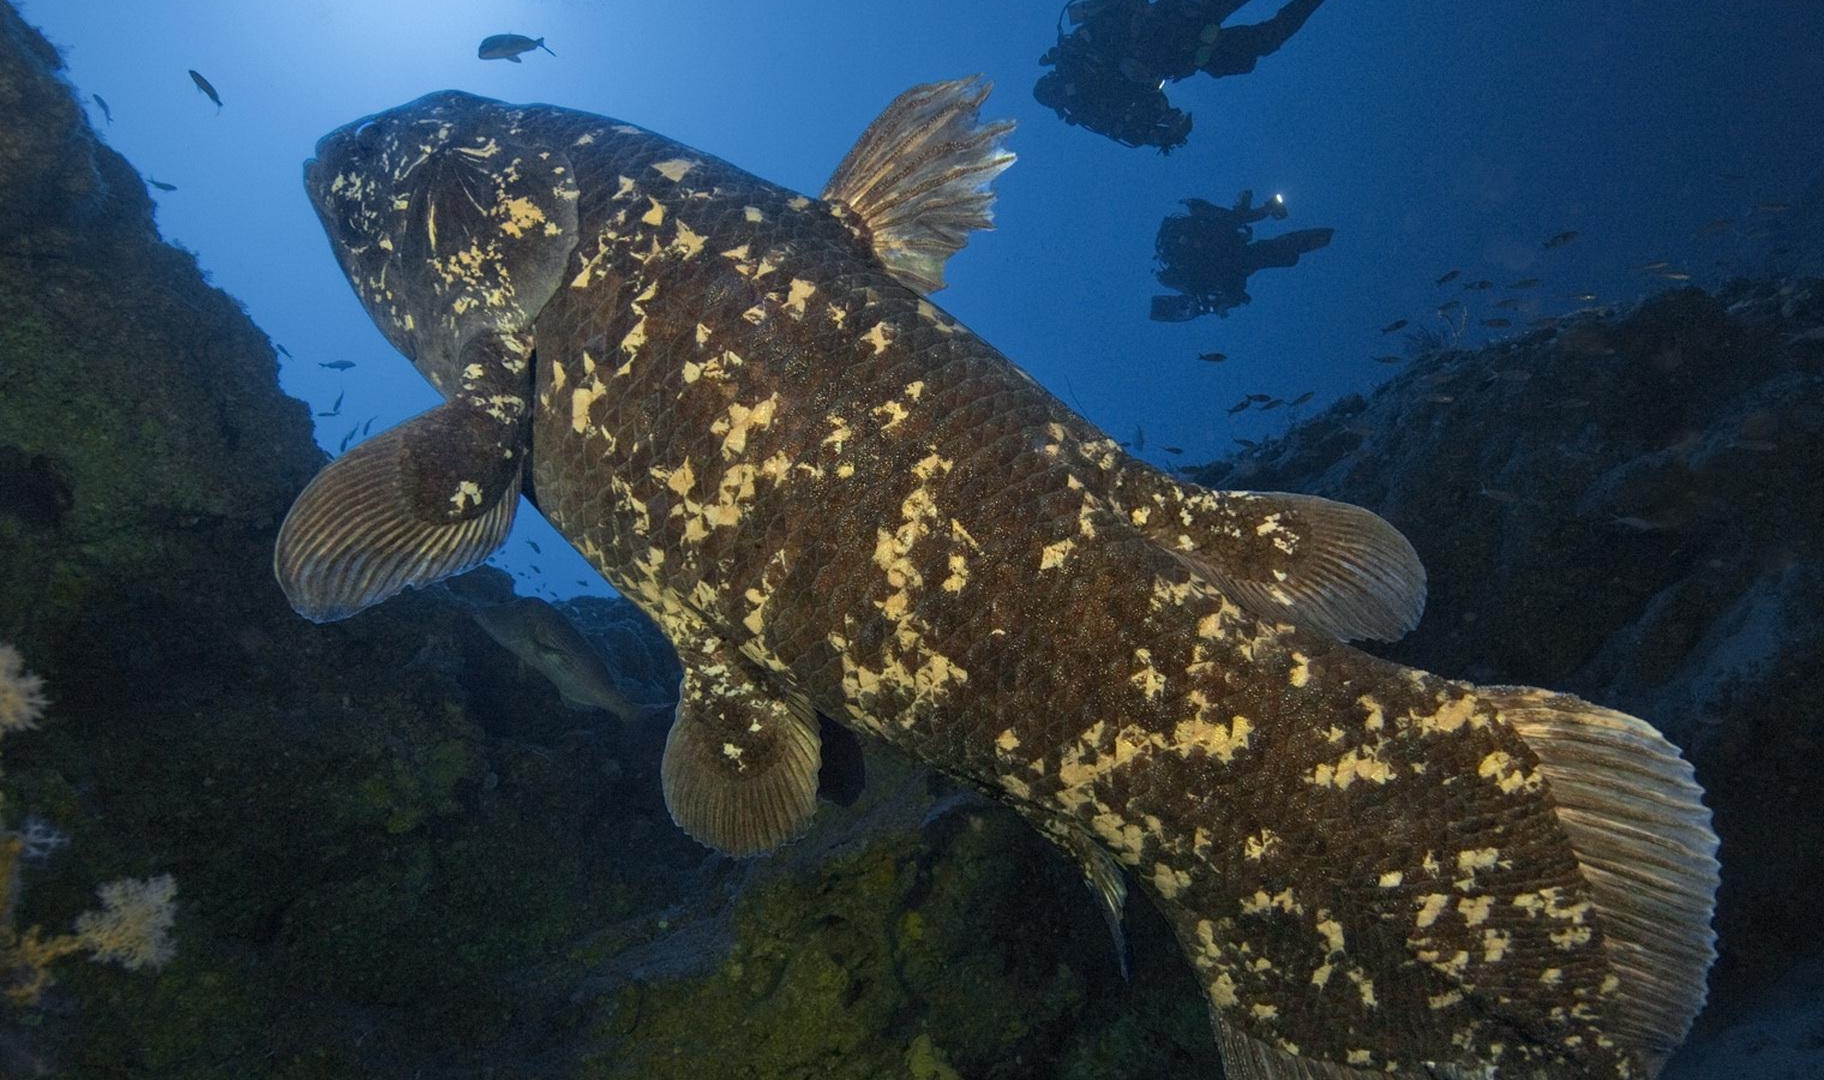 Coelacanth Image Image Gallery On Animal Picture Society